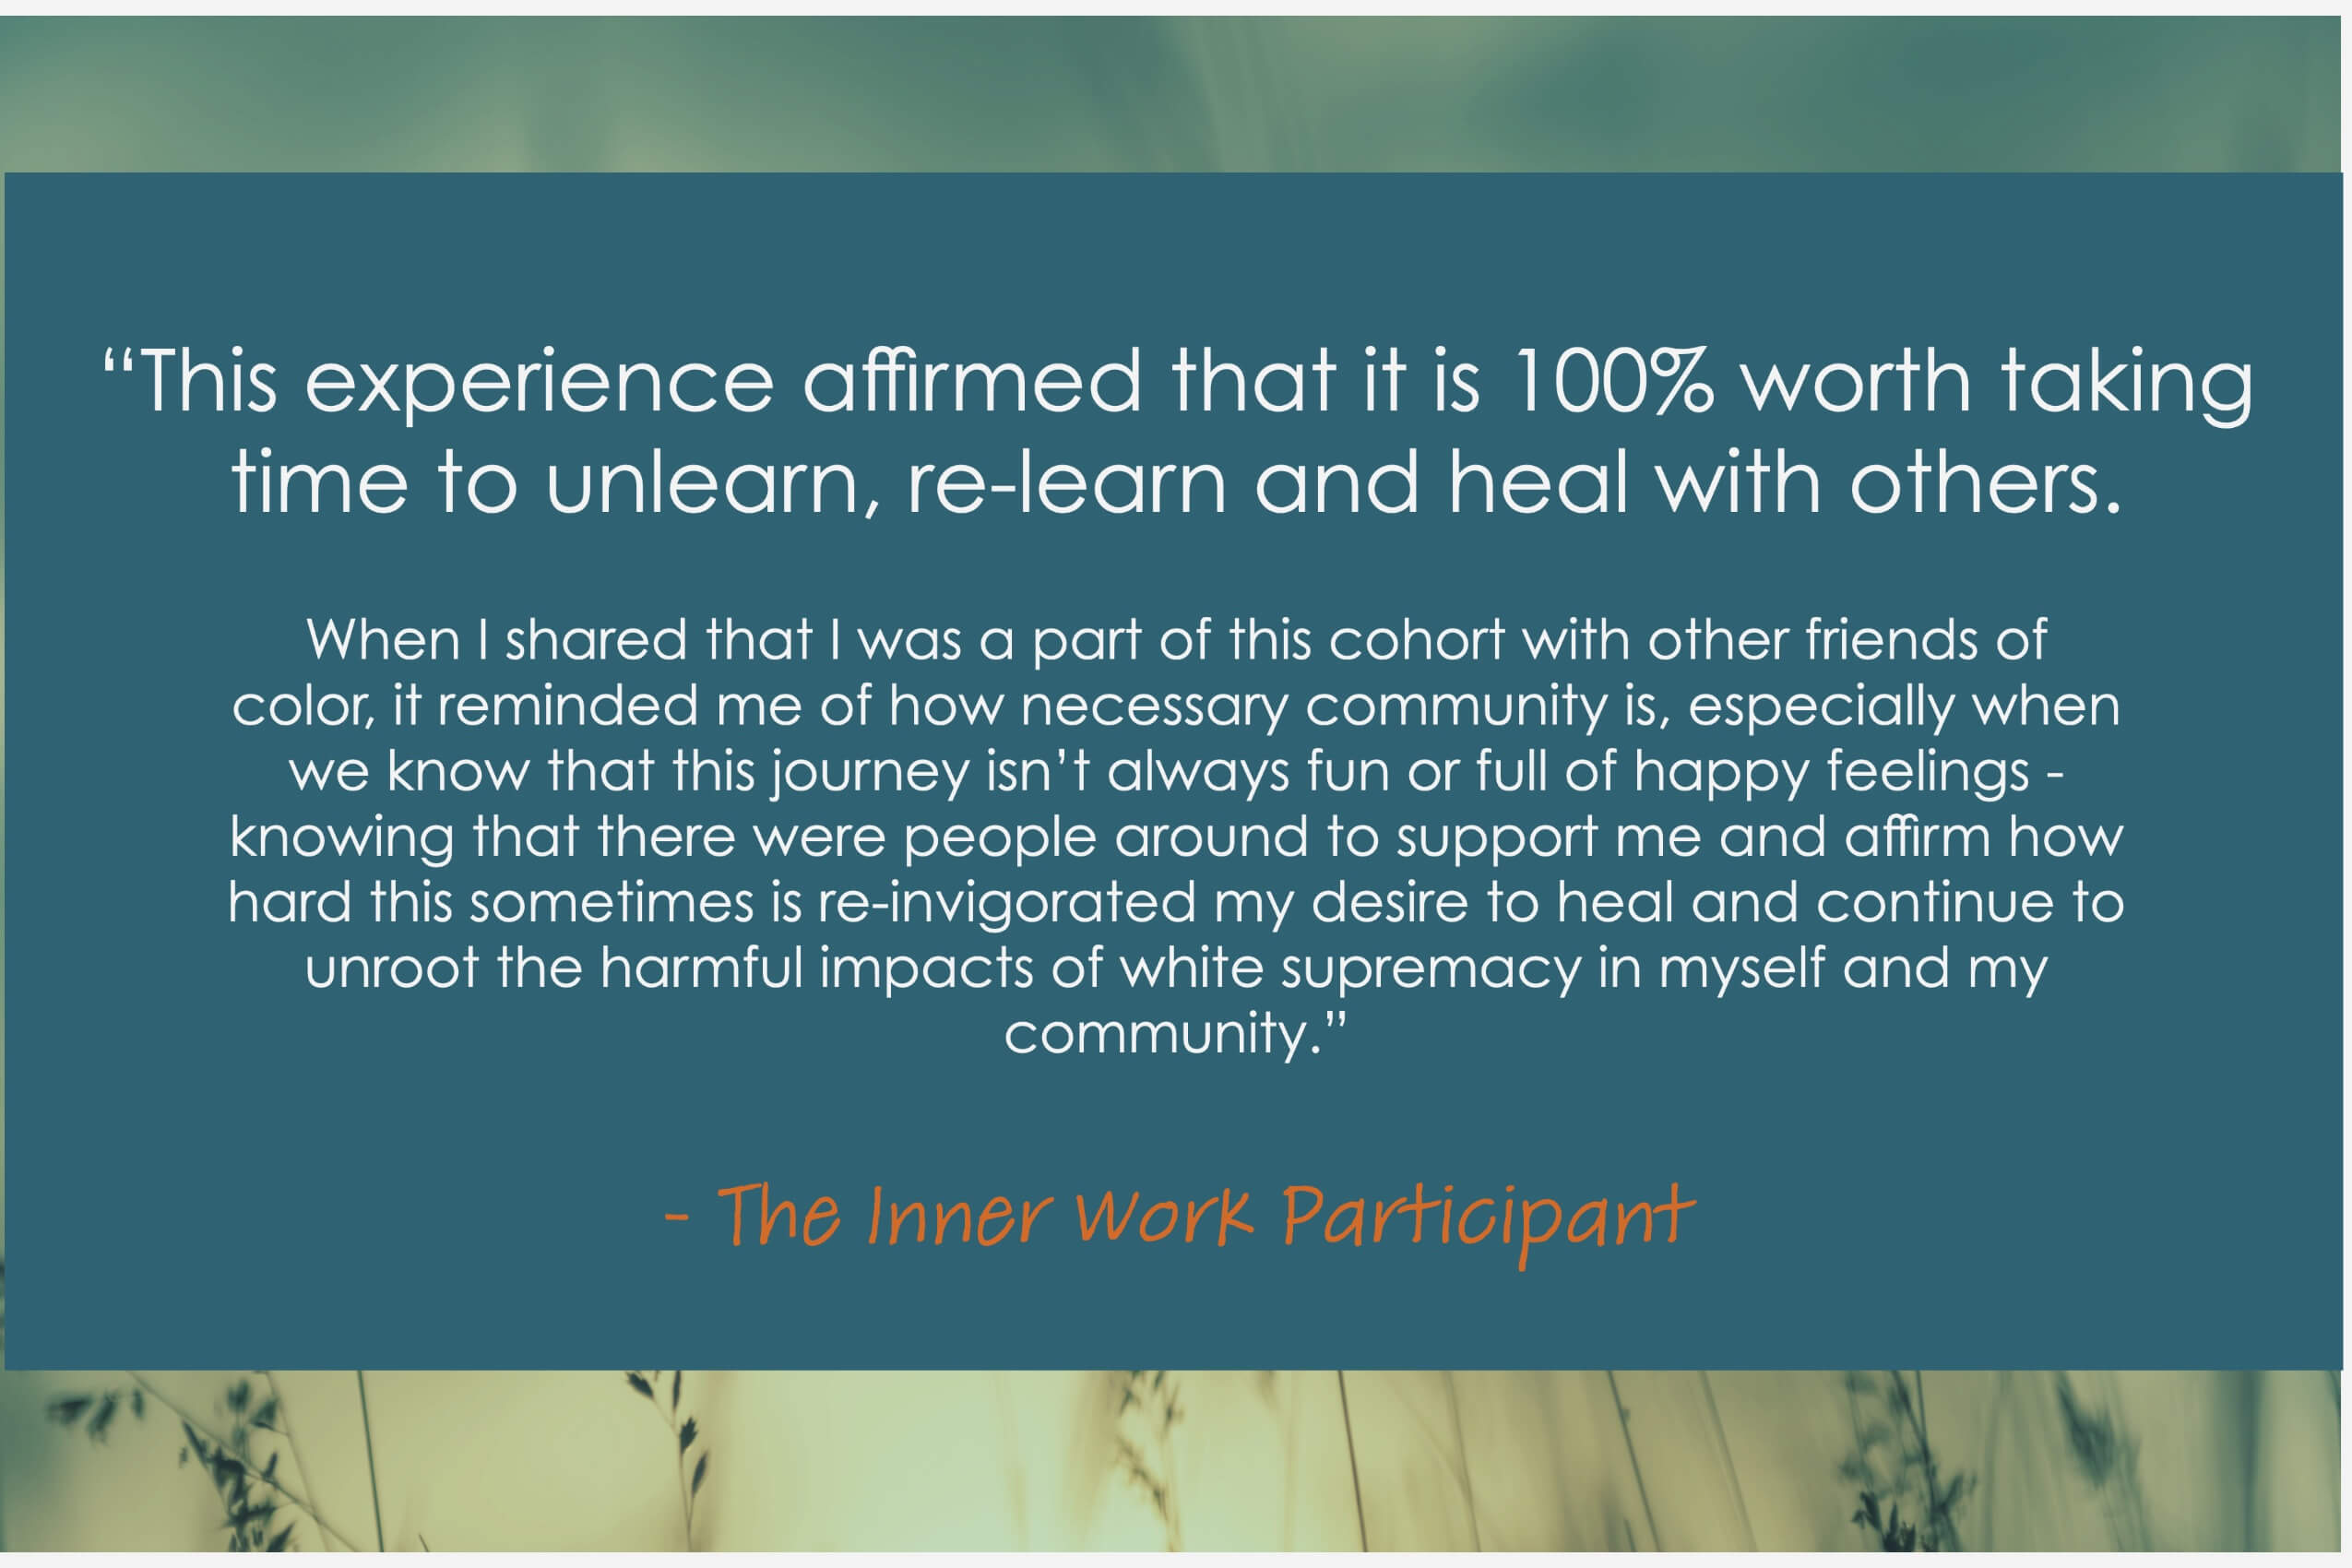 "This experience affirmed that it is 100% worth taking time to unlearn, re-learn and heal with others" - The Inner Work Participant